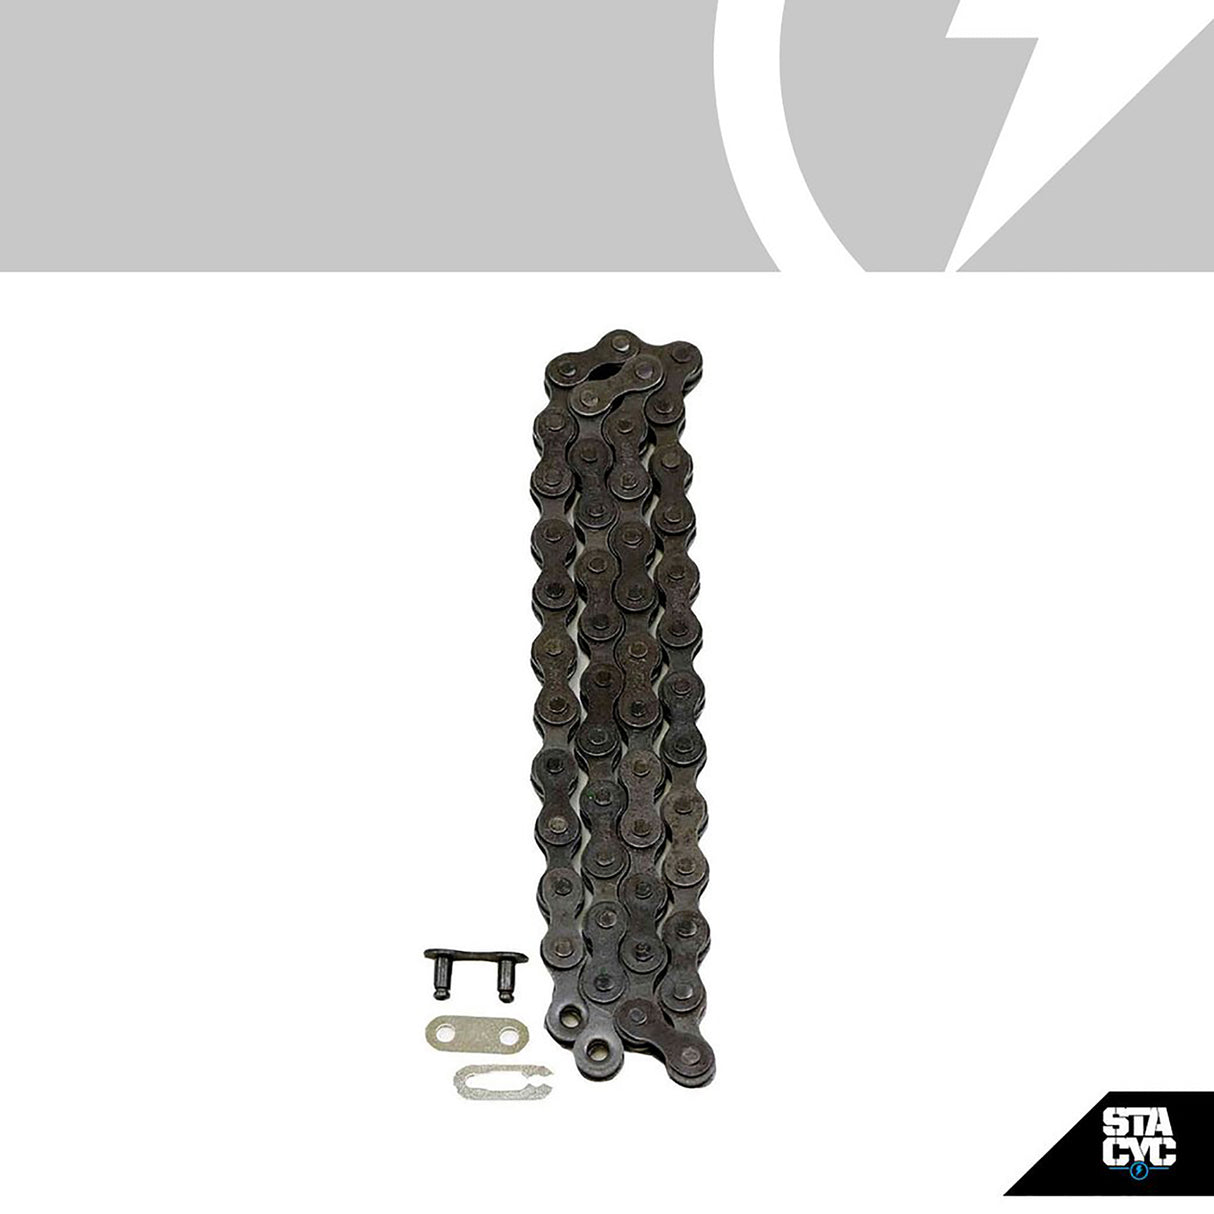 STACYC REPLACEMENT CHAIN - 16 EDRIVE